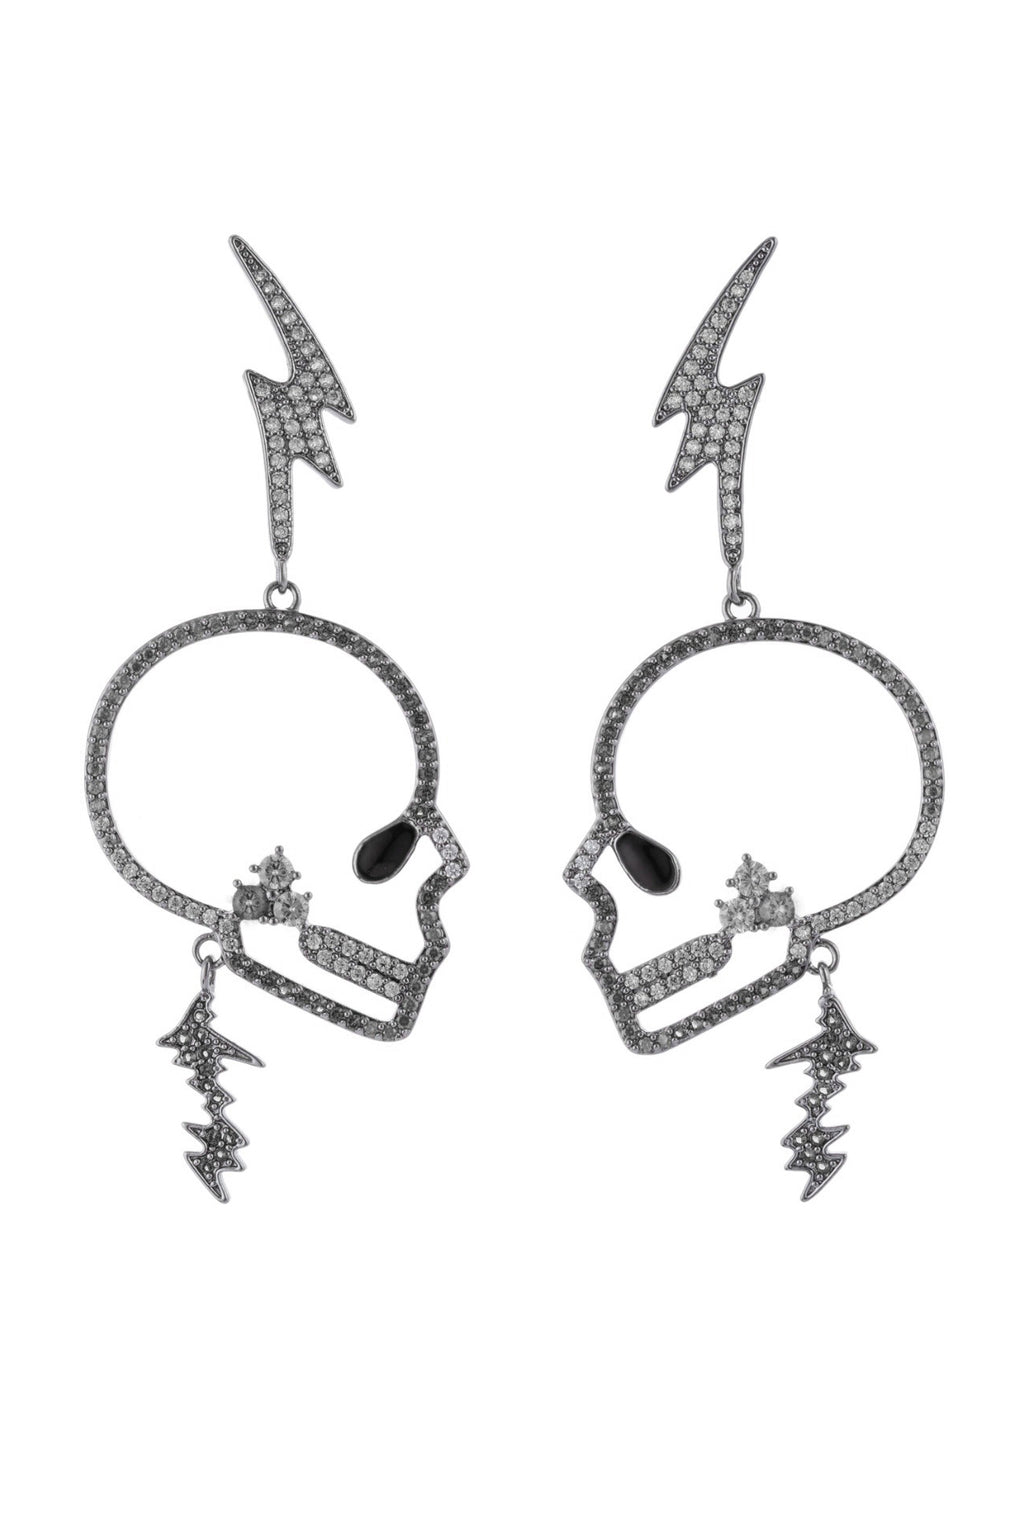 Silver tone brass skull statement earrings studded with CZ crystals.